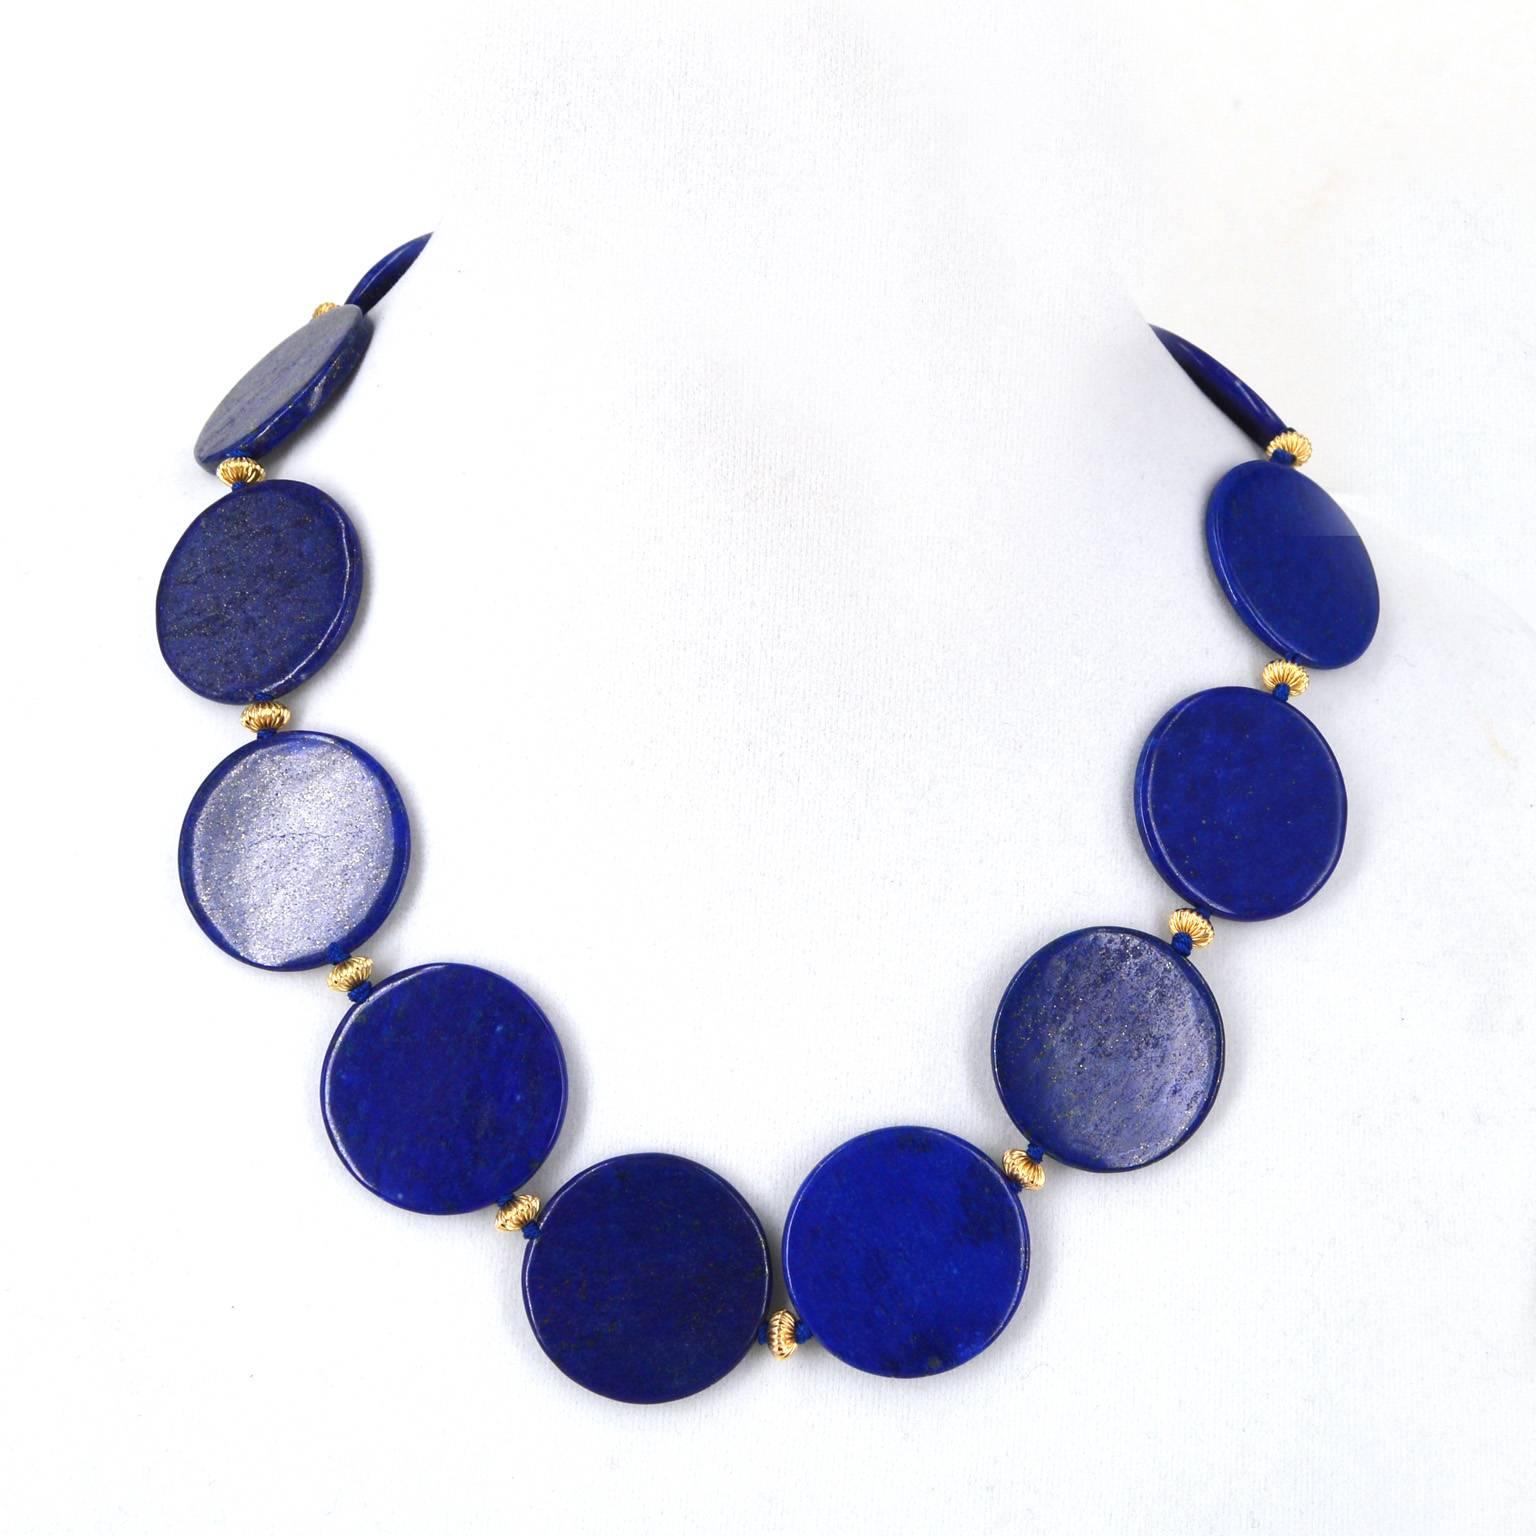 30mm polished flat disk Lapis Lazuli beads hand knotted on blue thread with 14k gold filled corrugated roundels and a 14k gold filled corrugated 14mm round clasp.
Total length of necklace 48cm.

